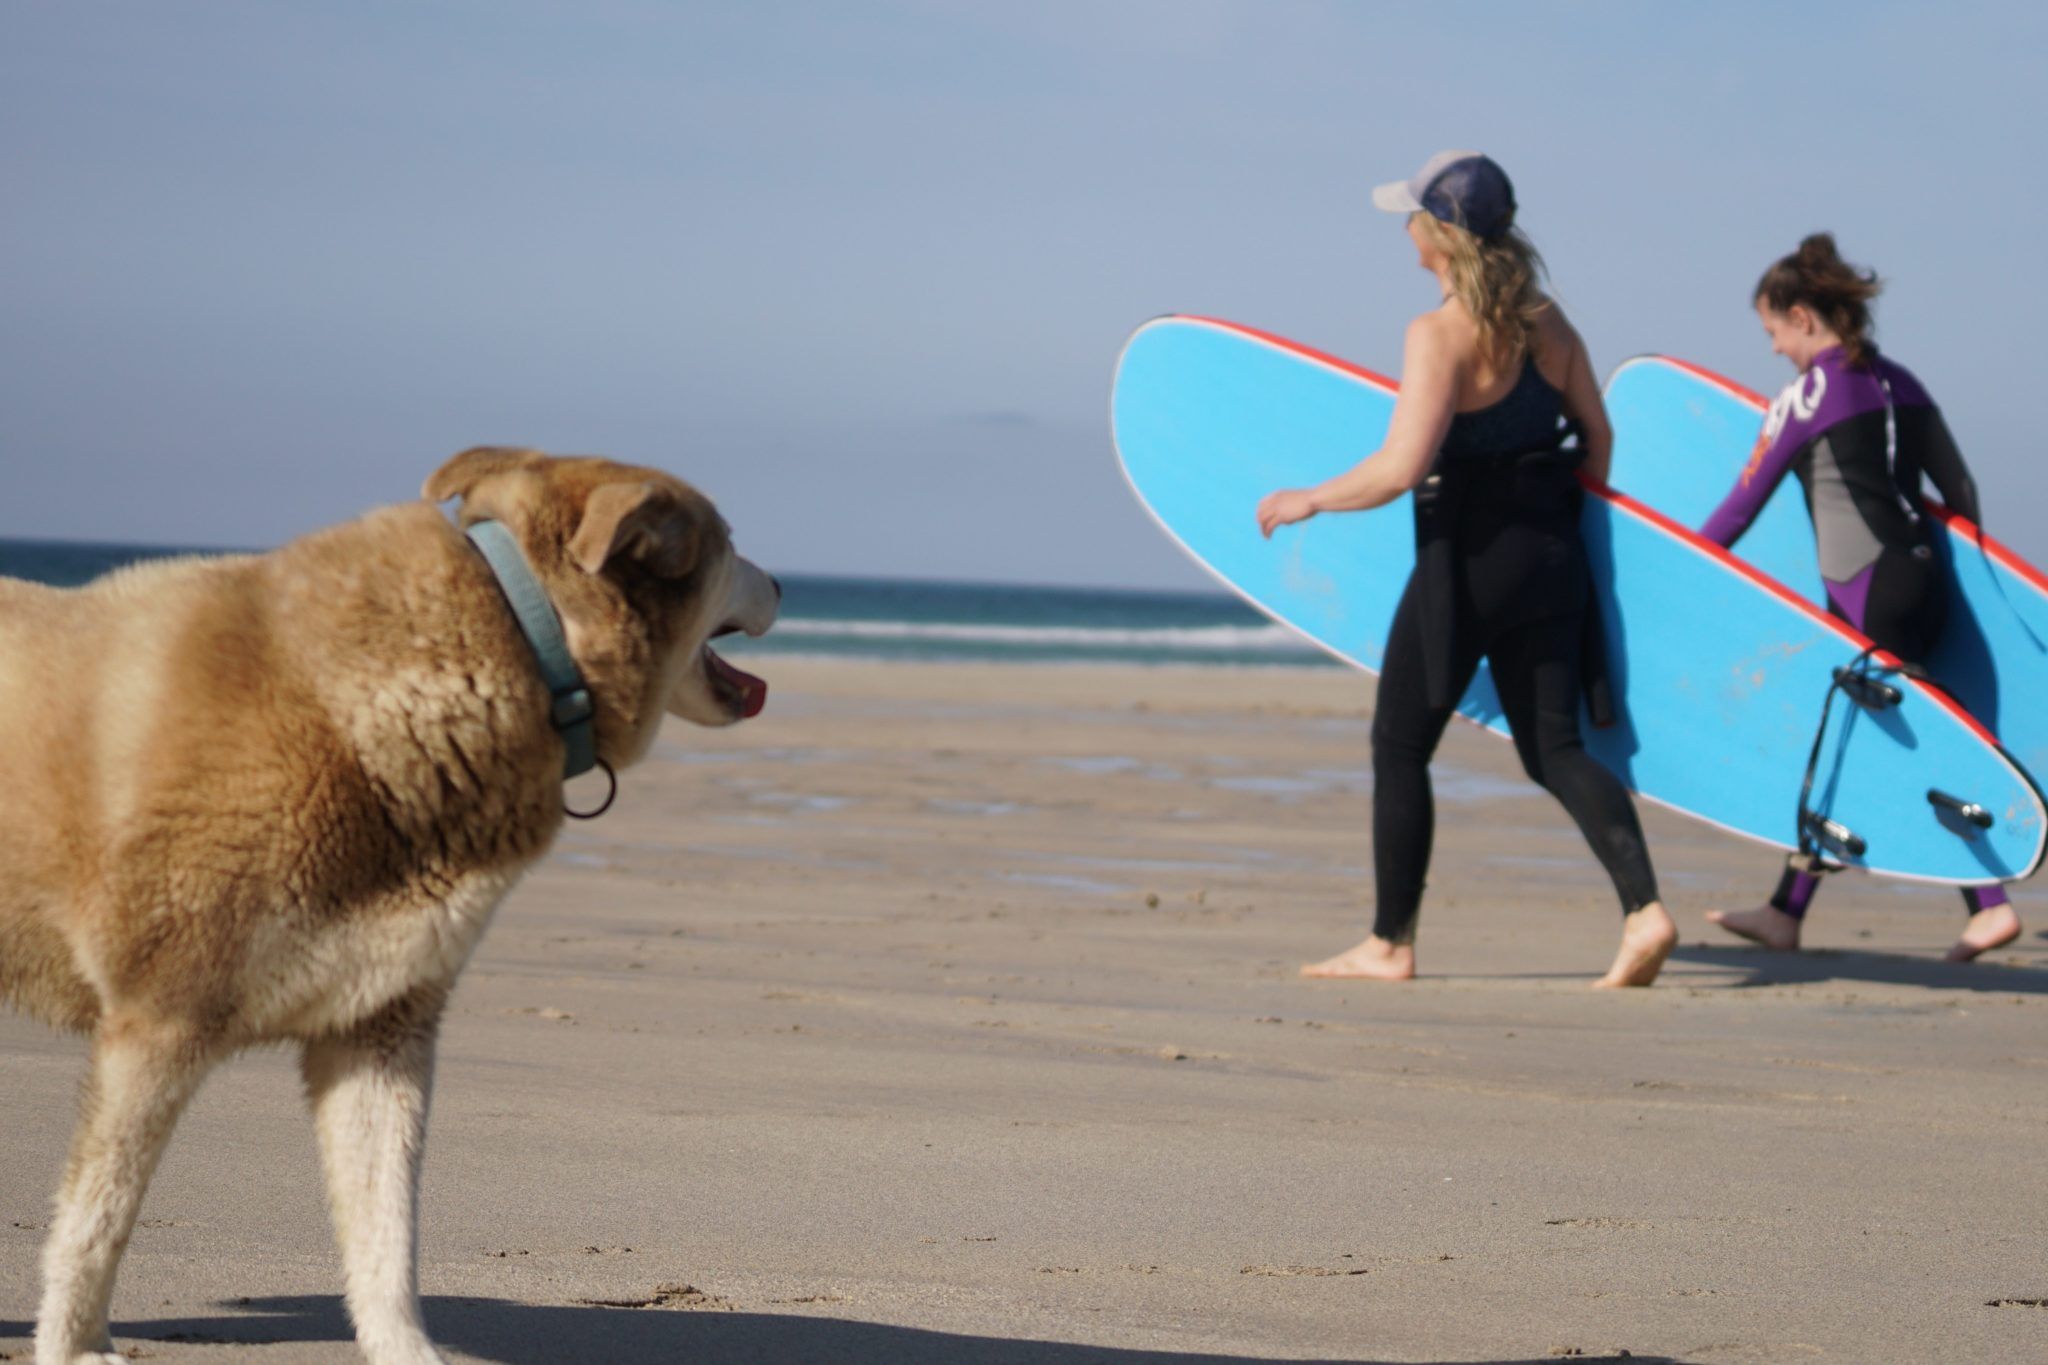 Mayo surf school to reopen with fluent Gaelic instructors